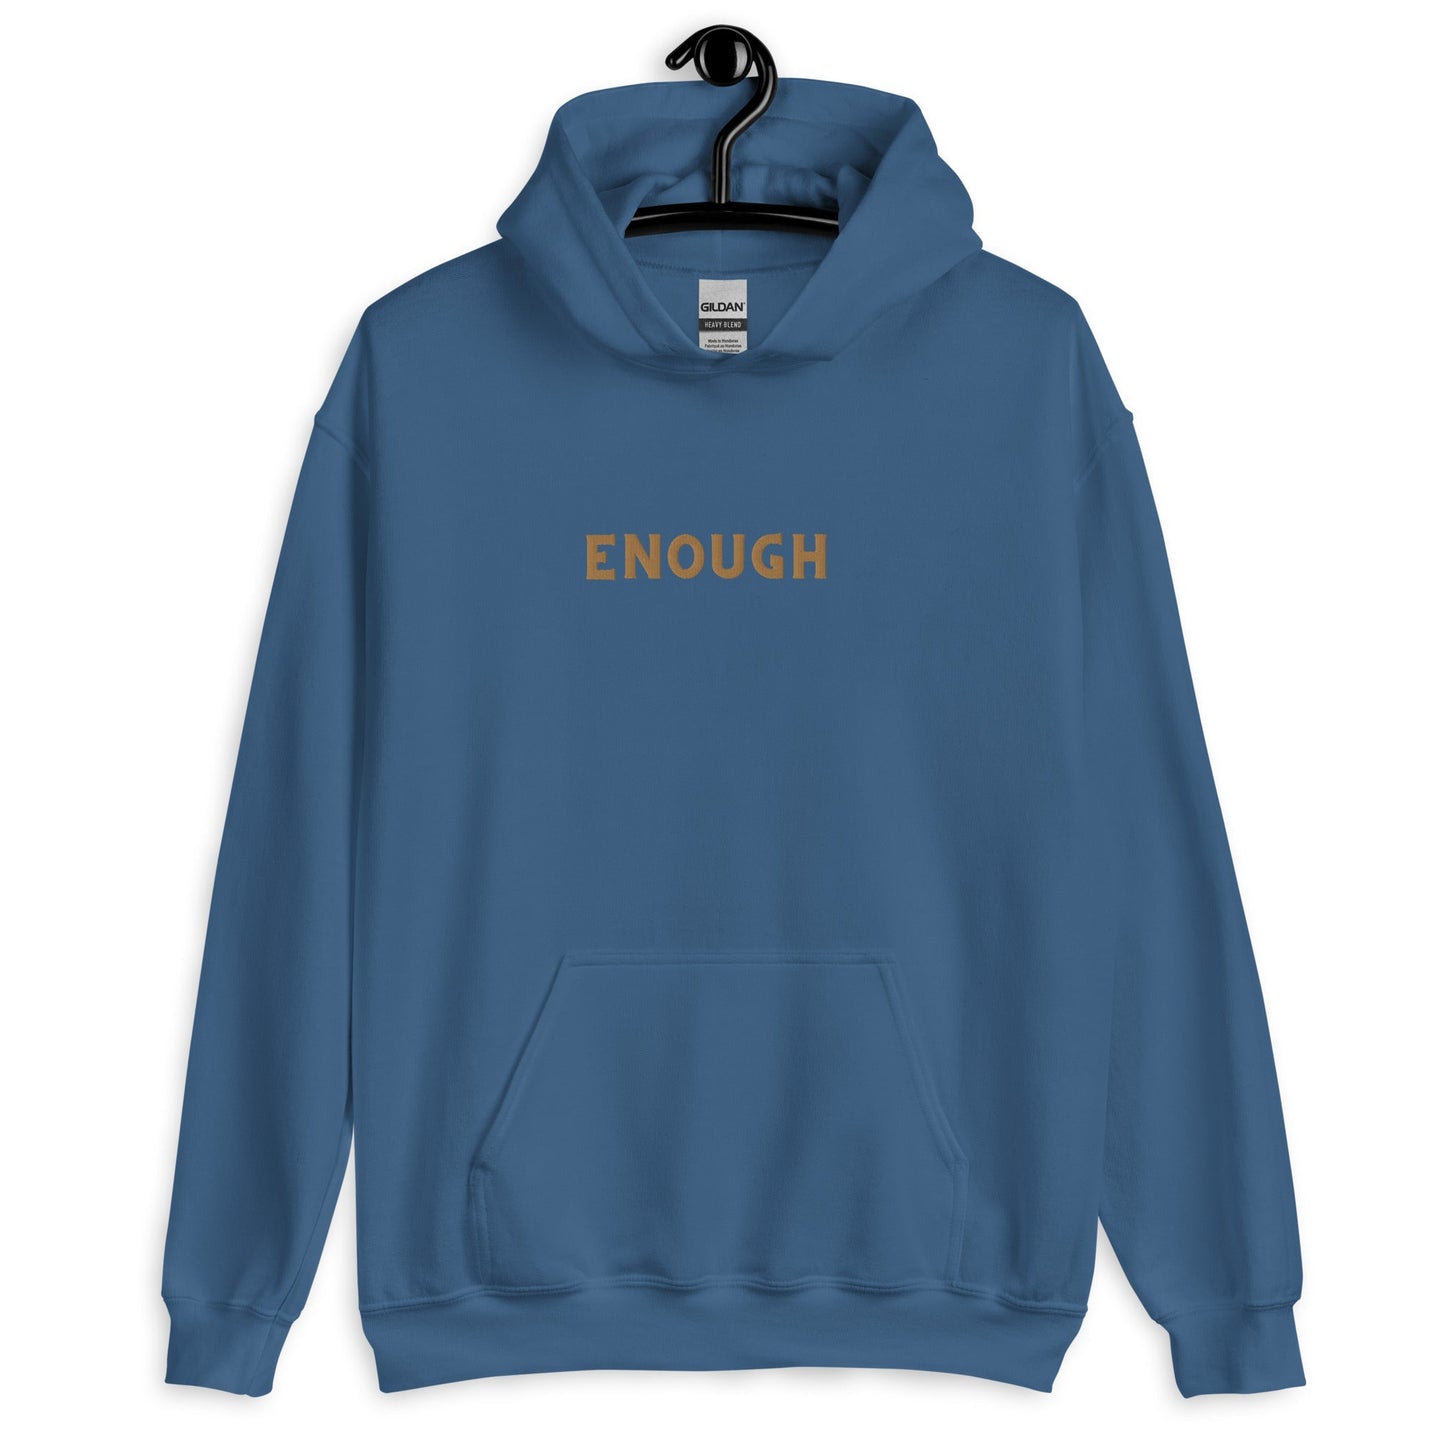 Craig's Crafting Co | You're Enough Unisex Hoodie - Craig’s Crafting Co.